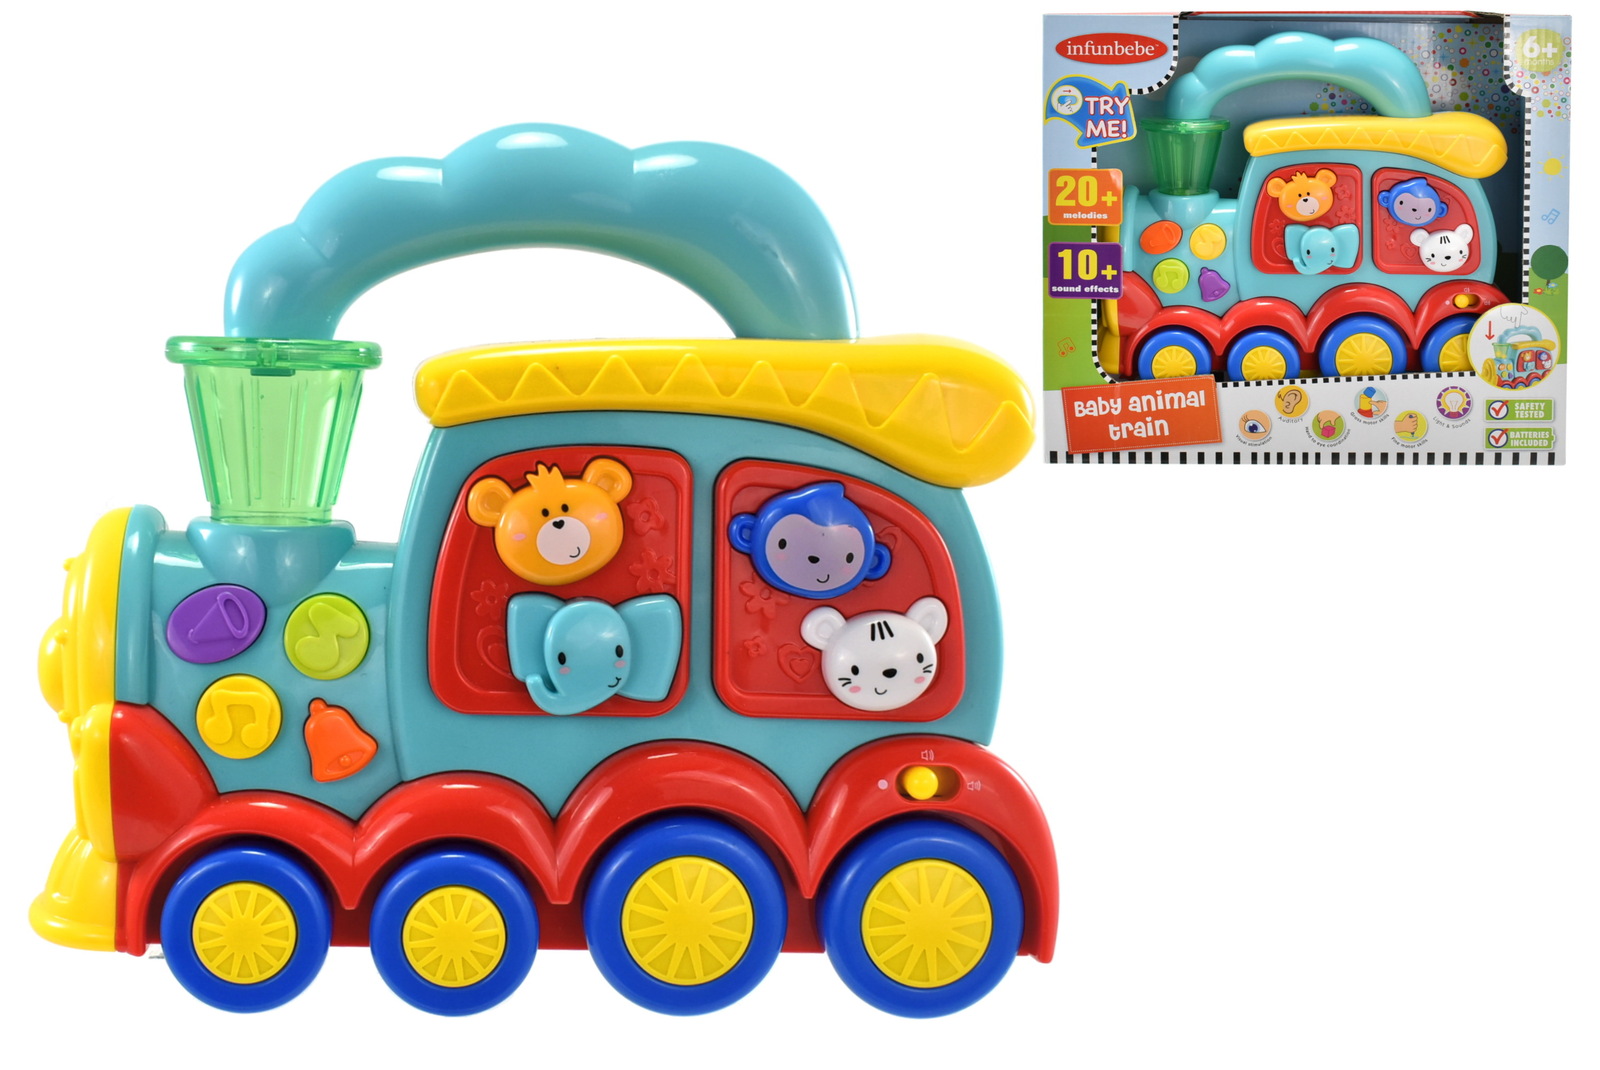 Infunbebe Baby Animal Train | Buy Toys Online at 